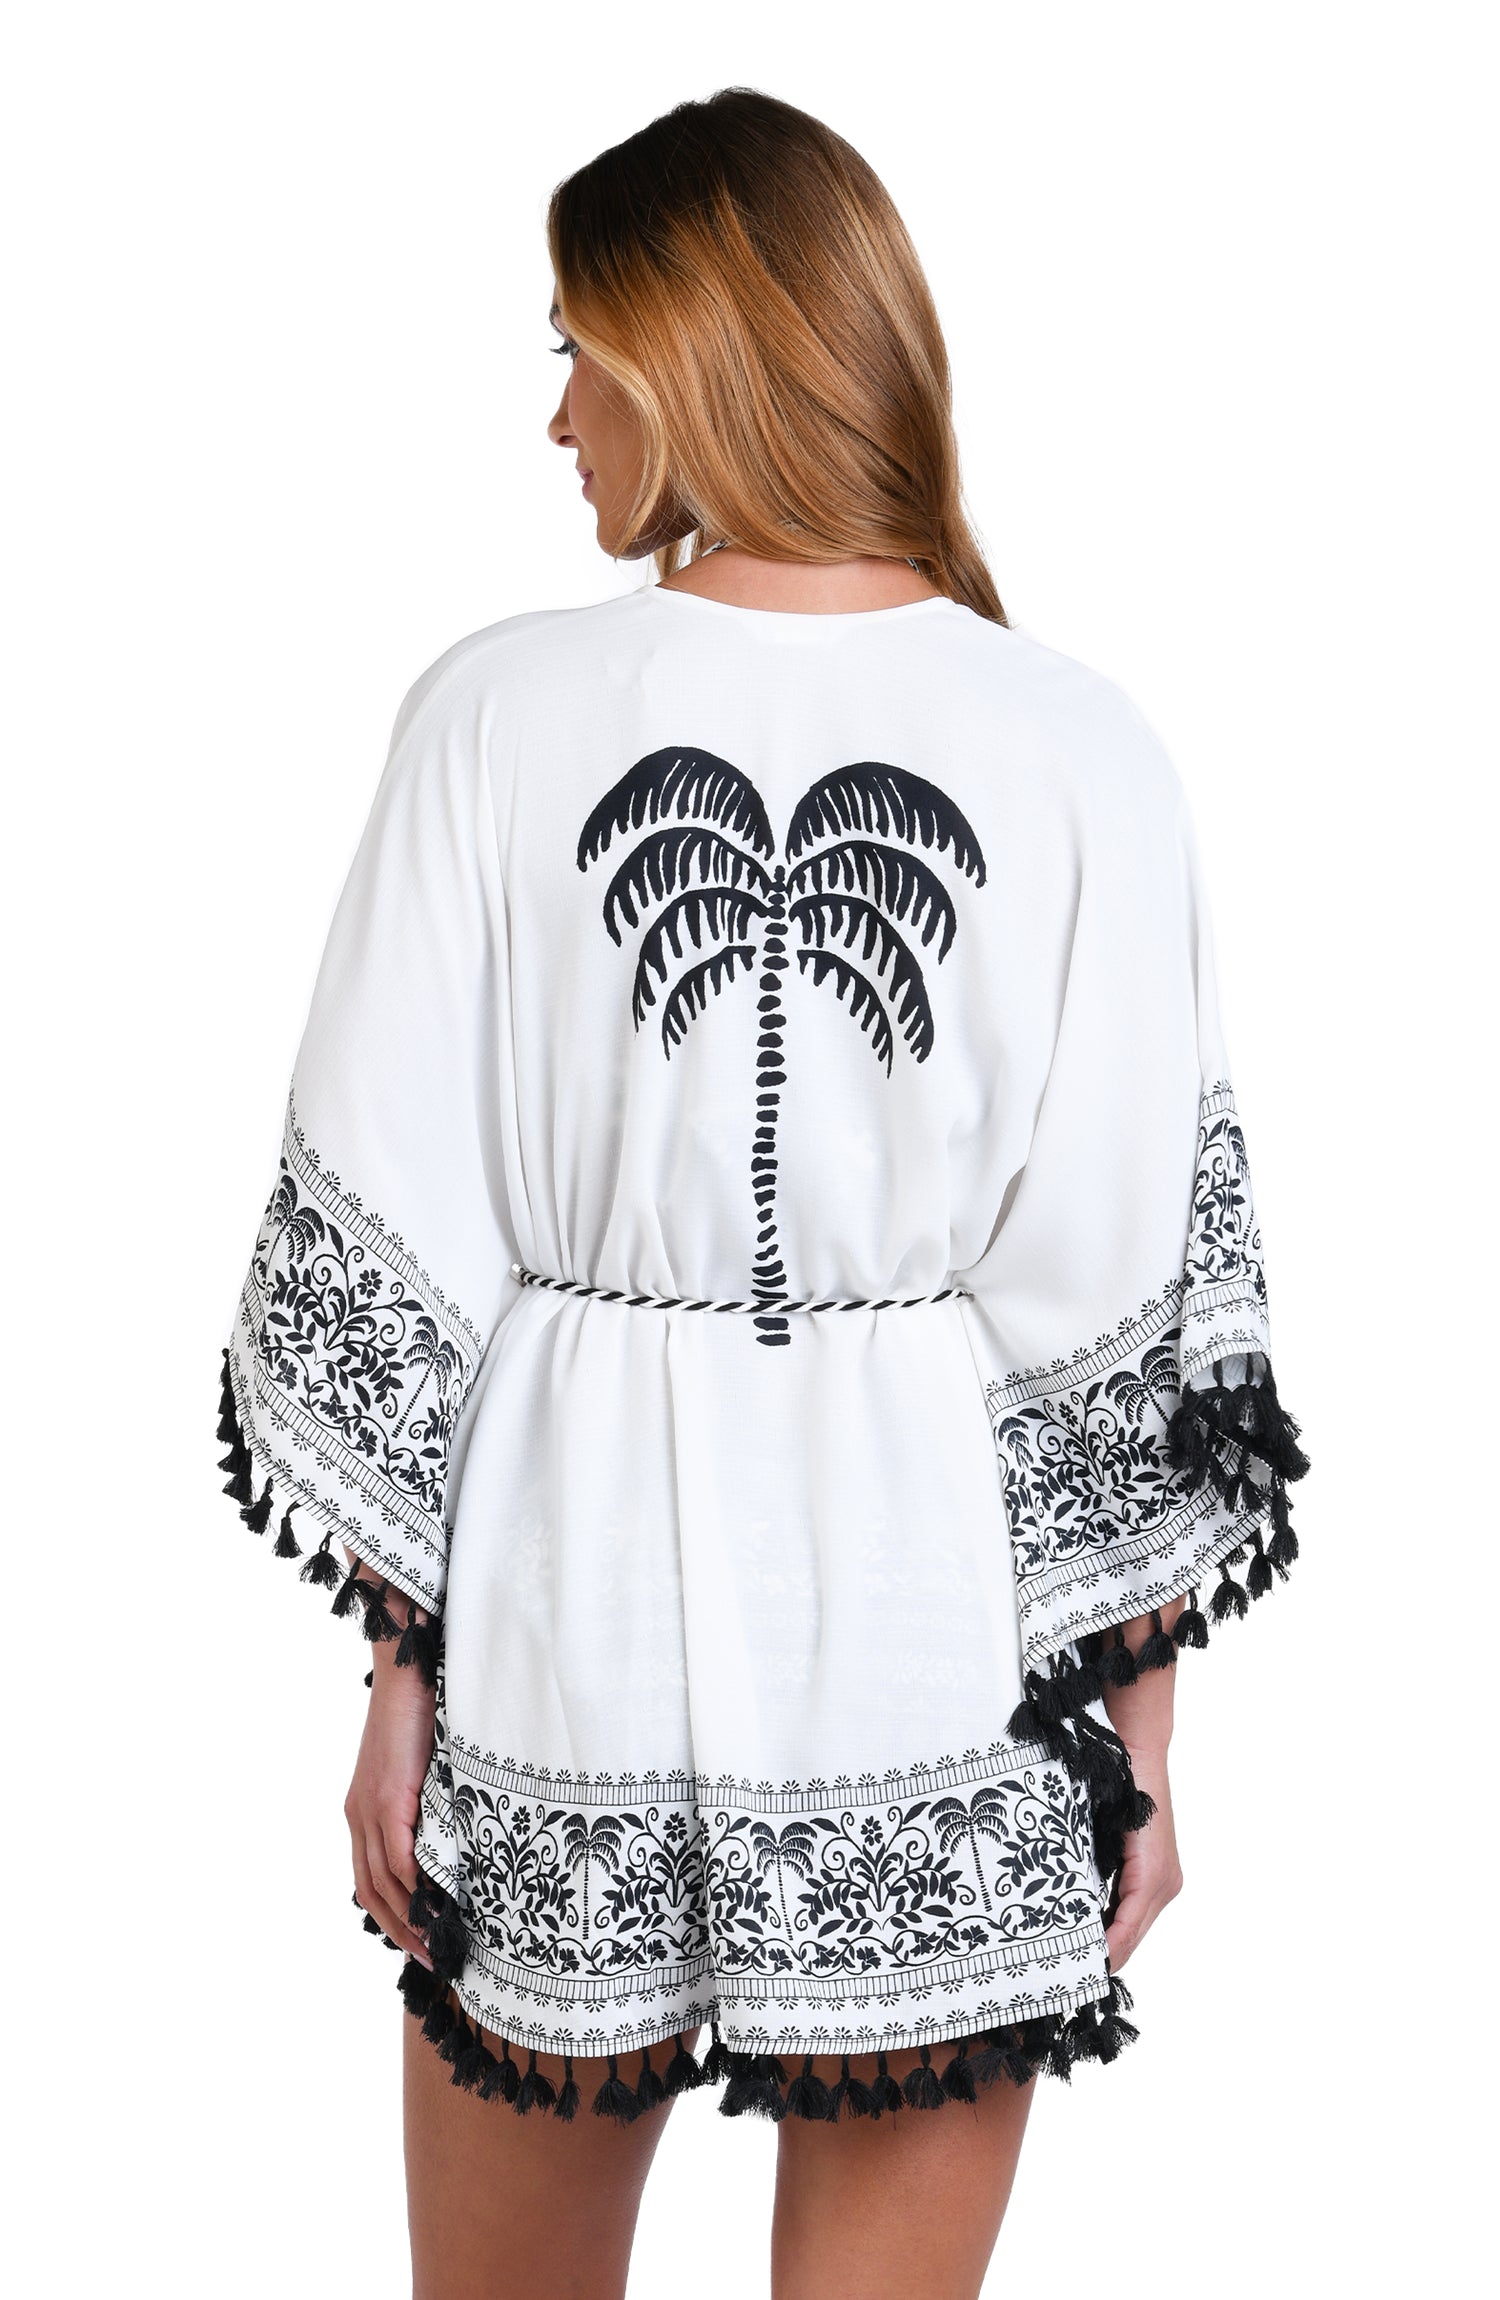 Model is wearing a black and white monochromatic patterned kimono cover up that features an allover tropical motif with hints of palm trees and pineapples set against a black background.